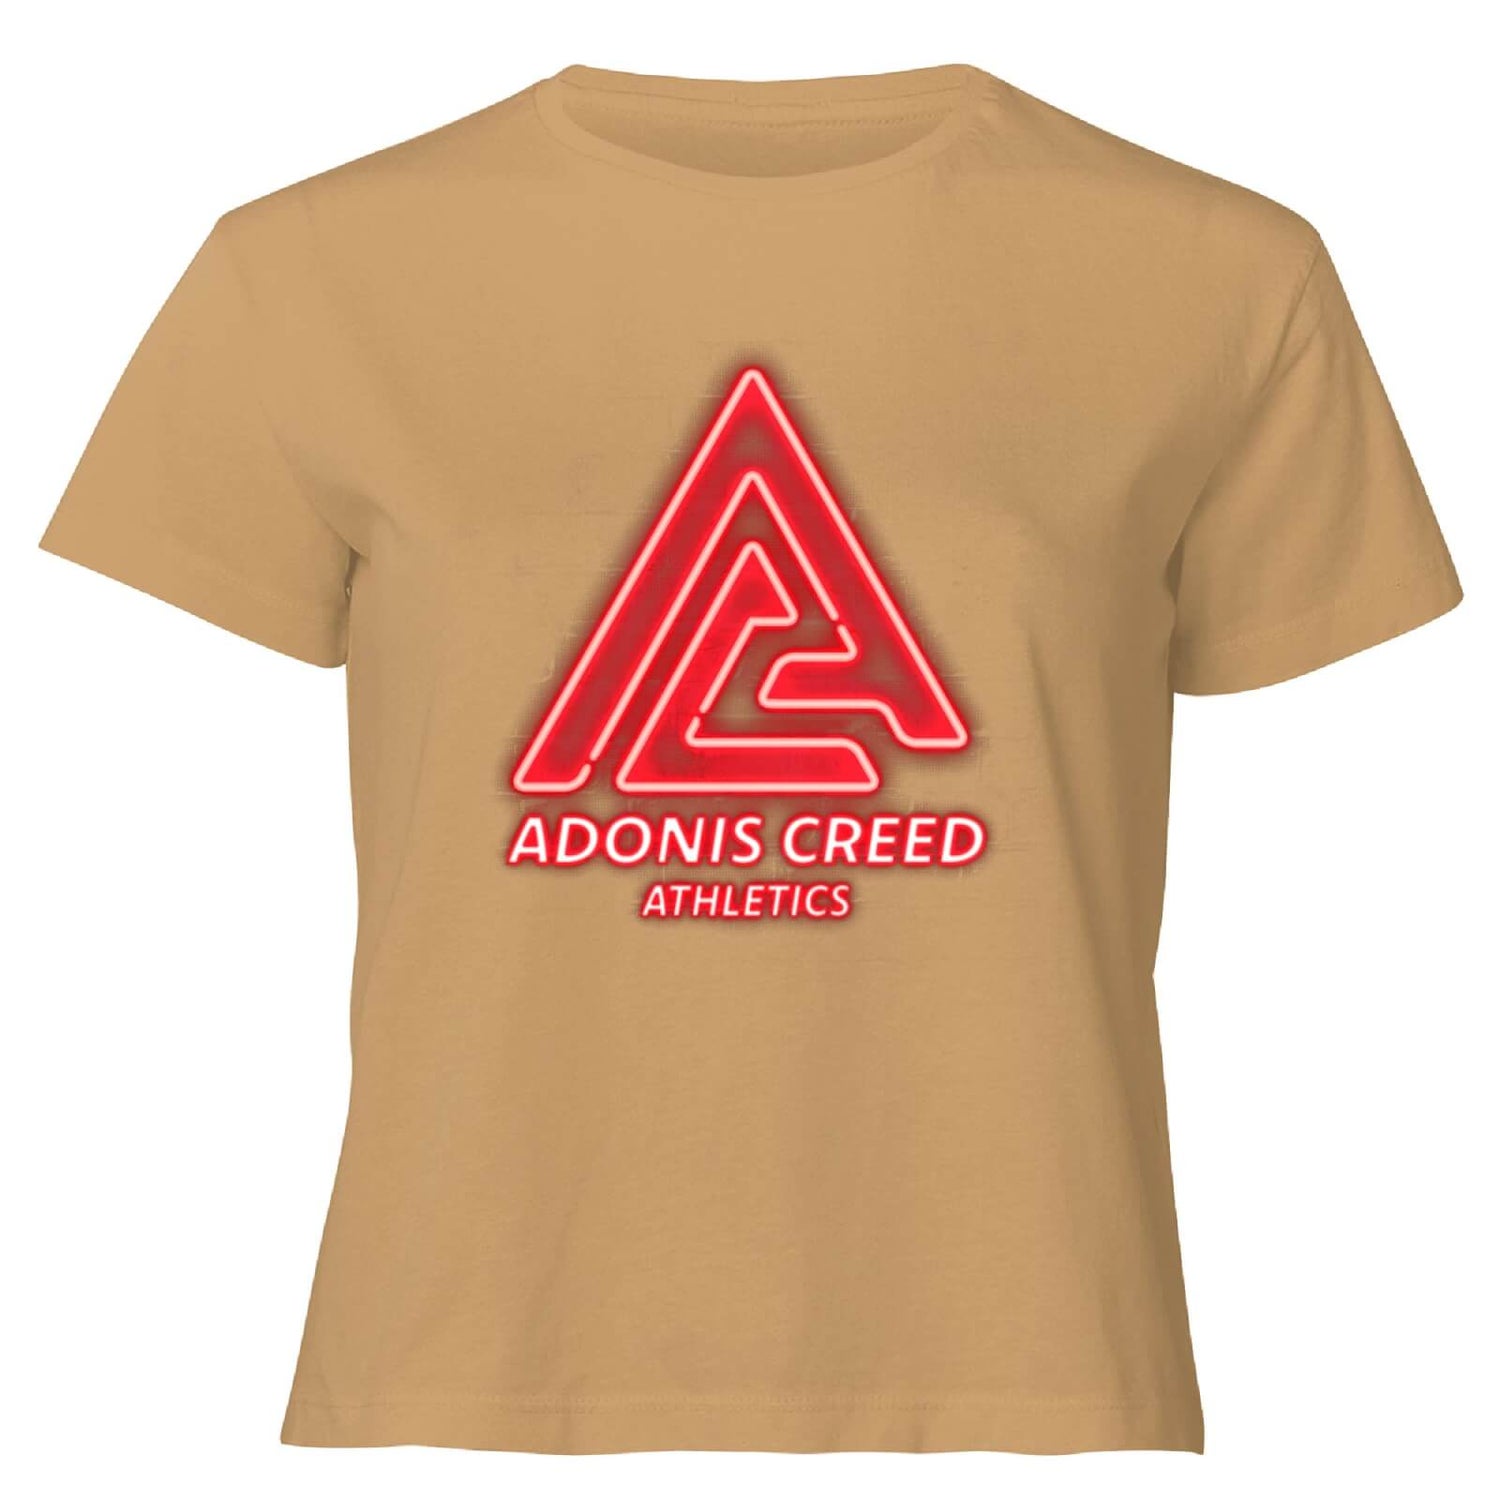 Creed Adonis Creed Athletics Neon Sign Women's Cropped T-Shirt - Tan